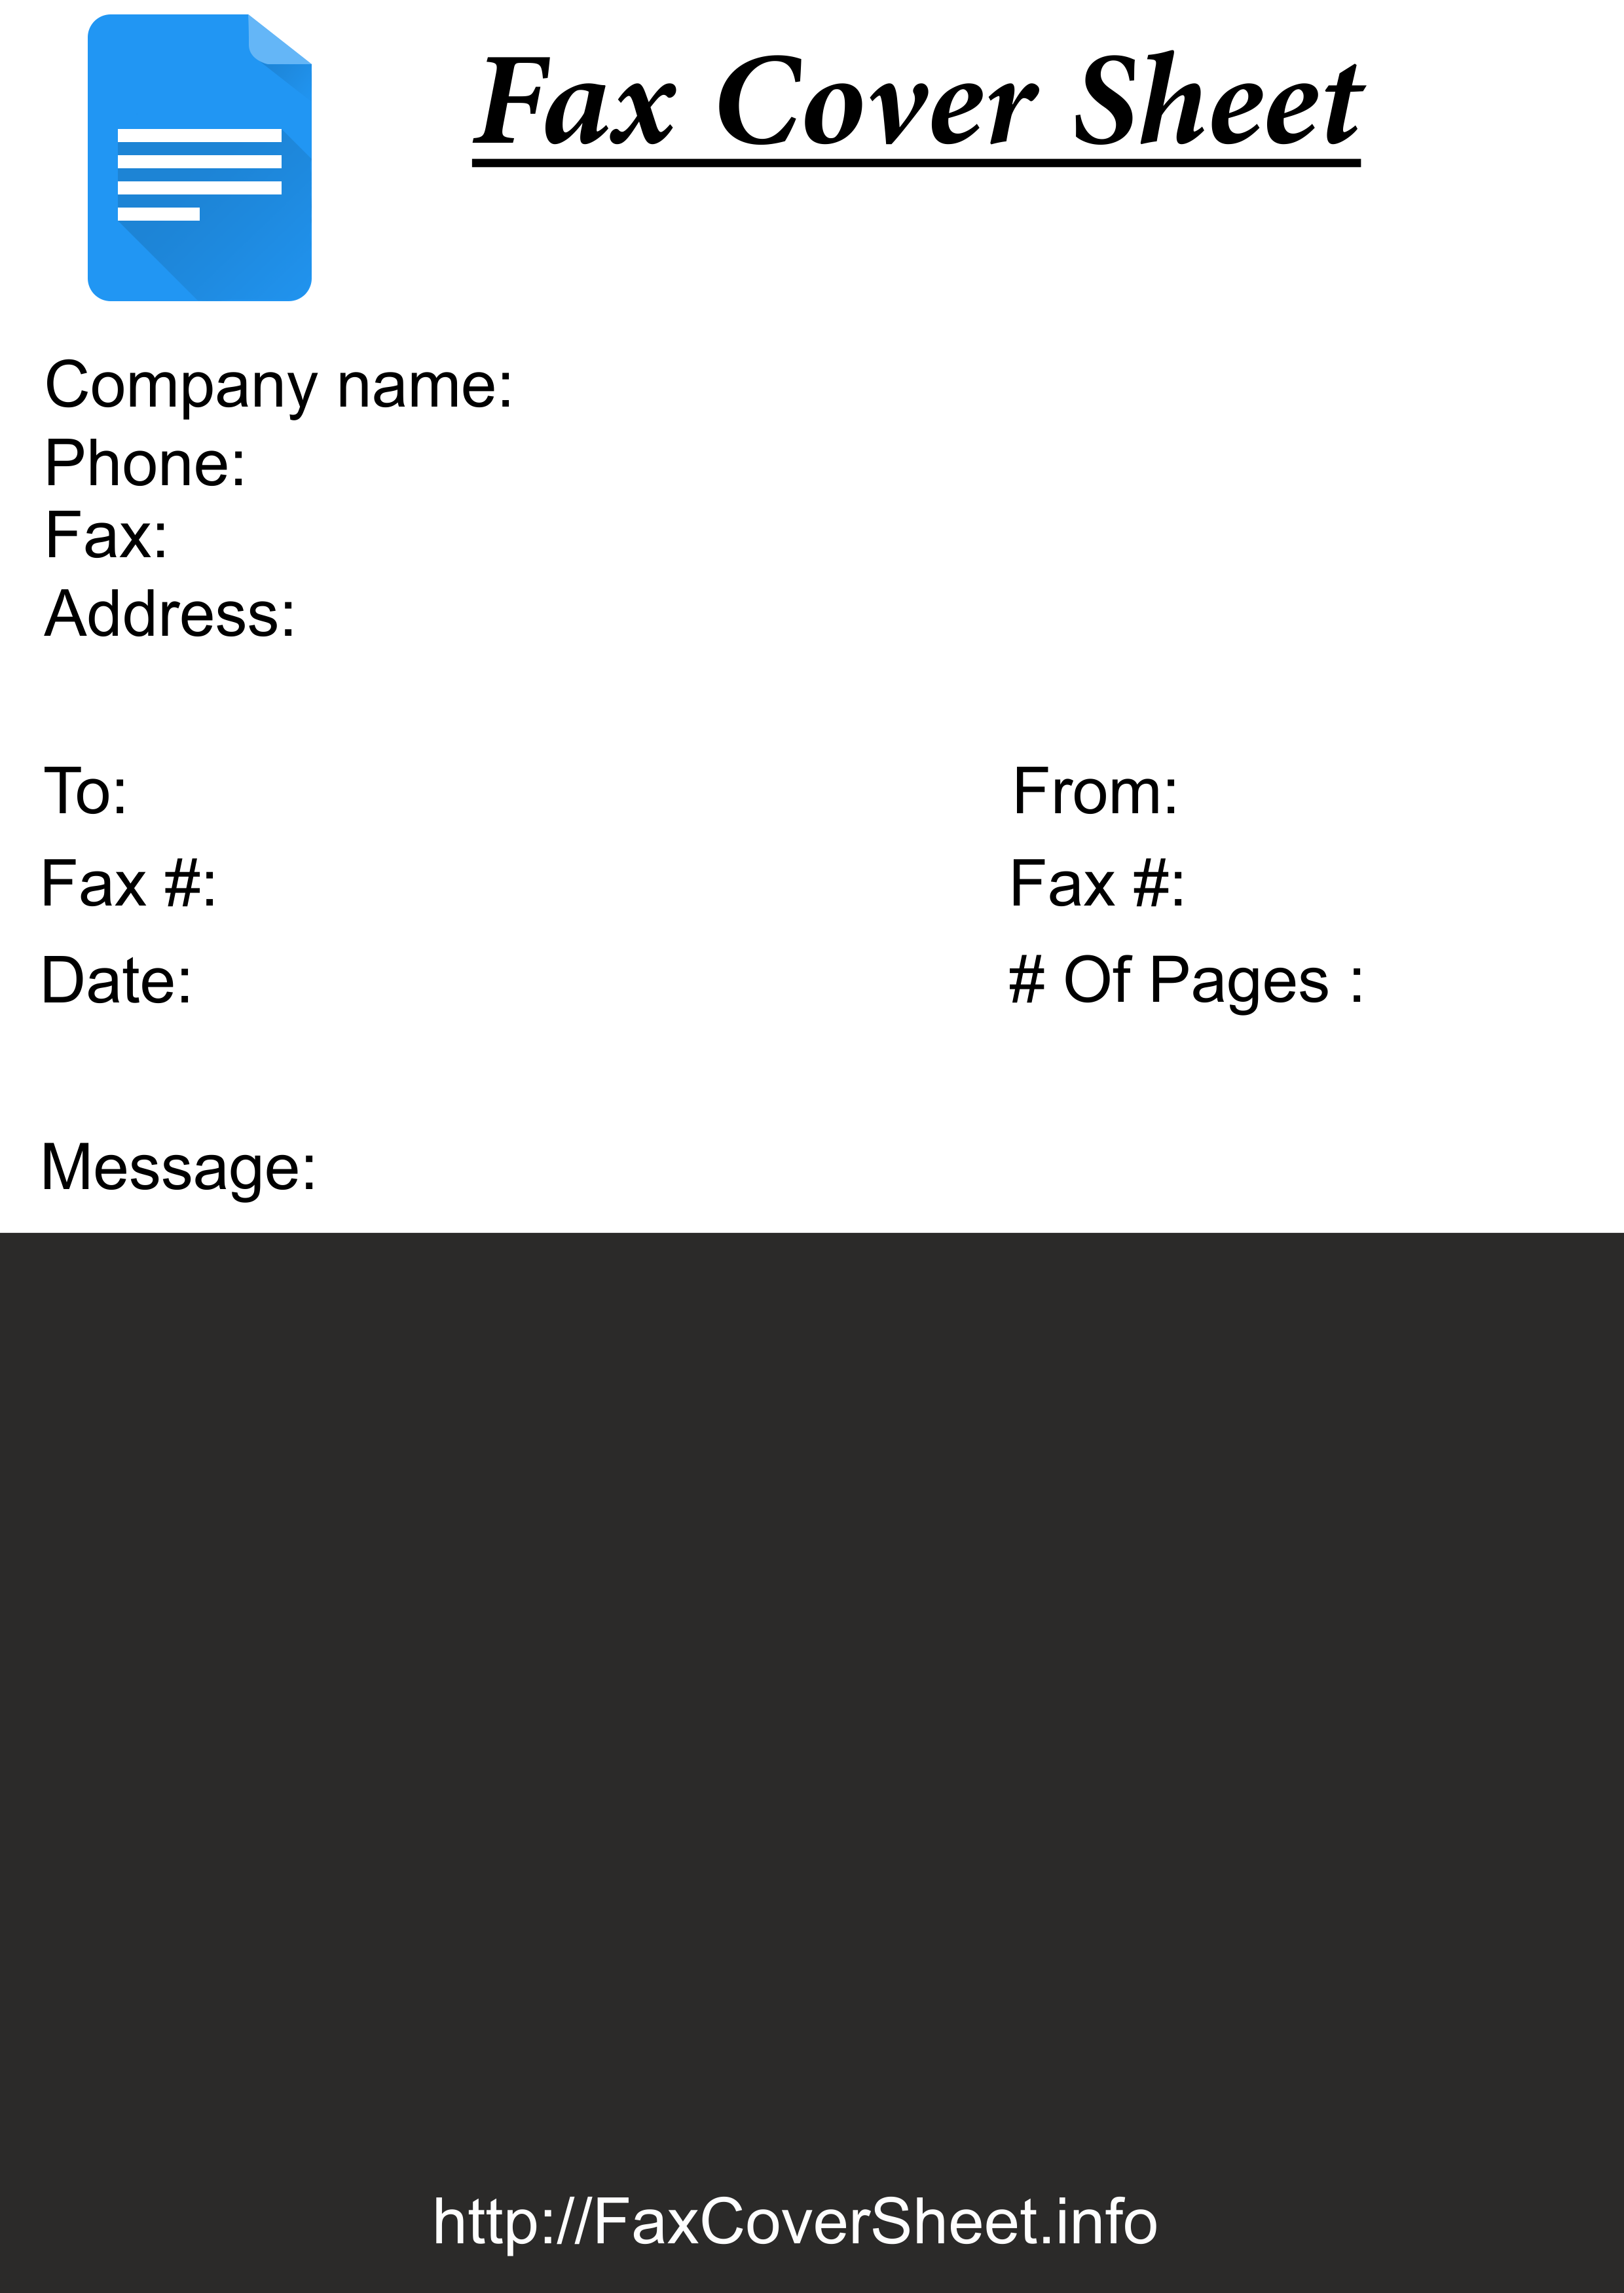 Ready To Use Google Docs Fax Cover Sheet Free Fax Cover Sheet Template Download